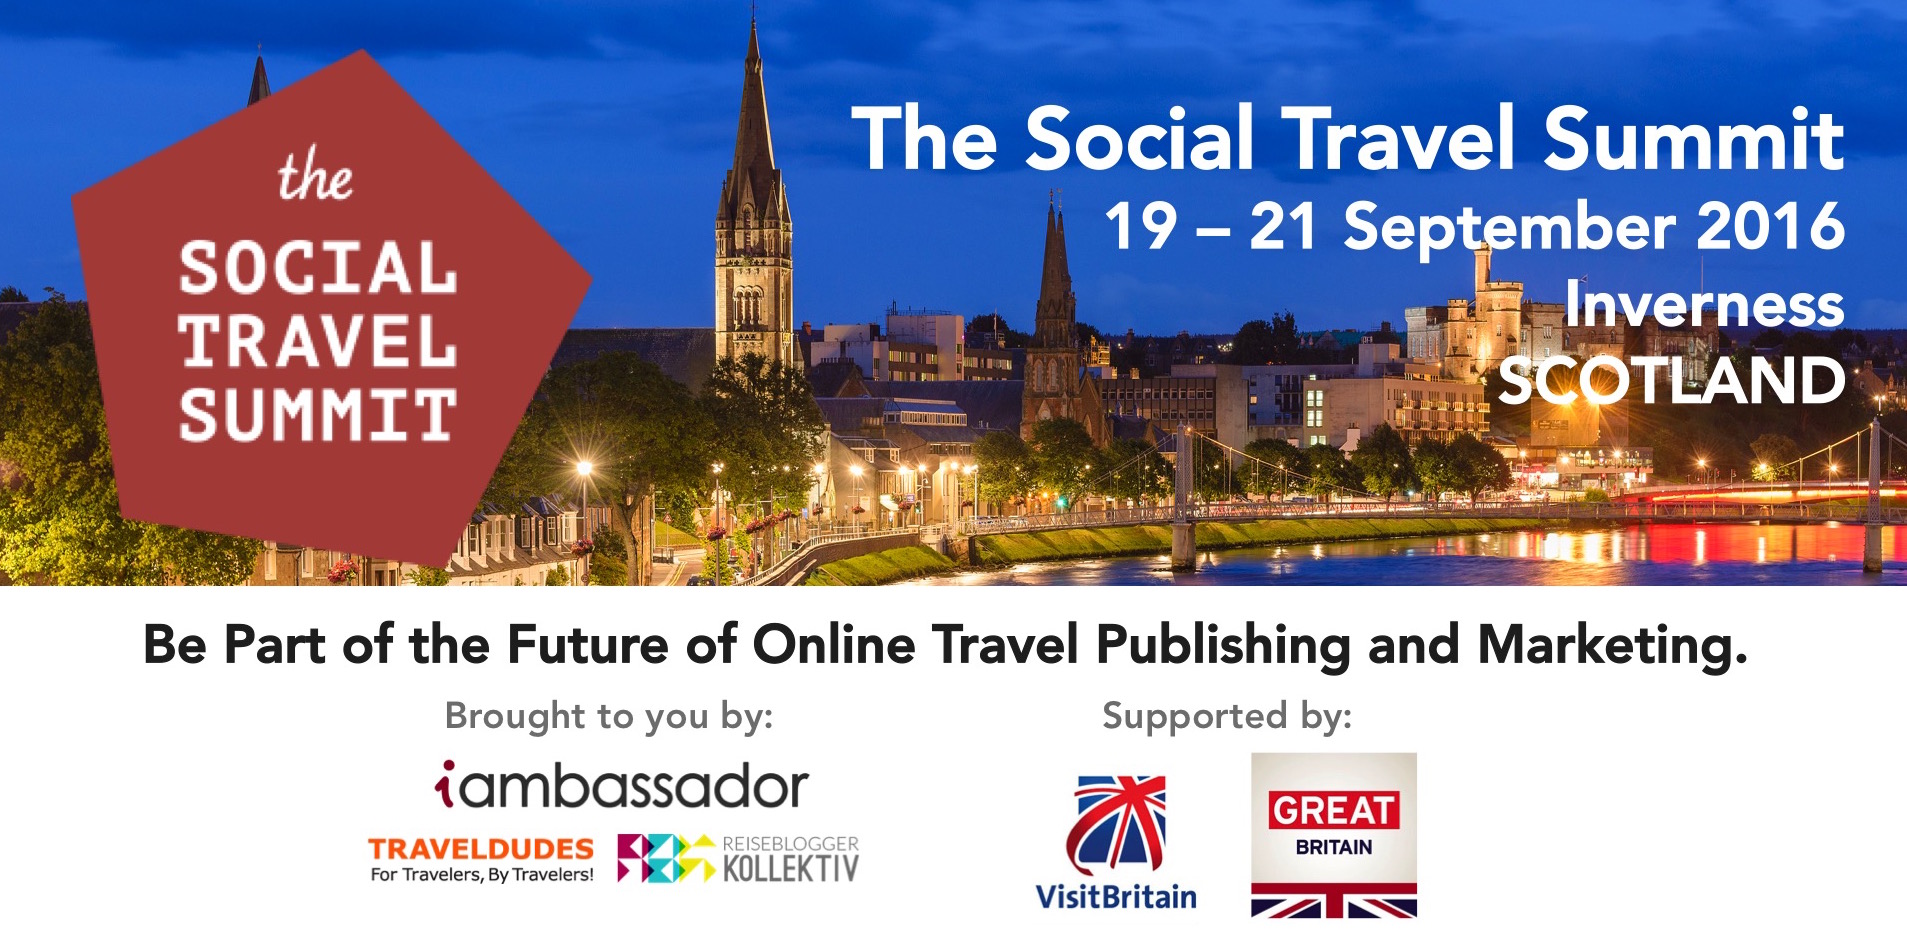 The Social Travel Summit 2016 goes to Inverness!